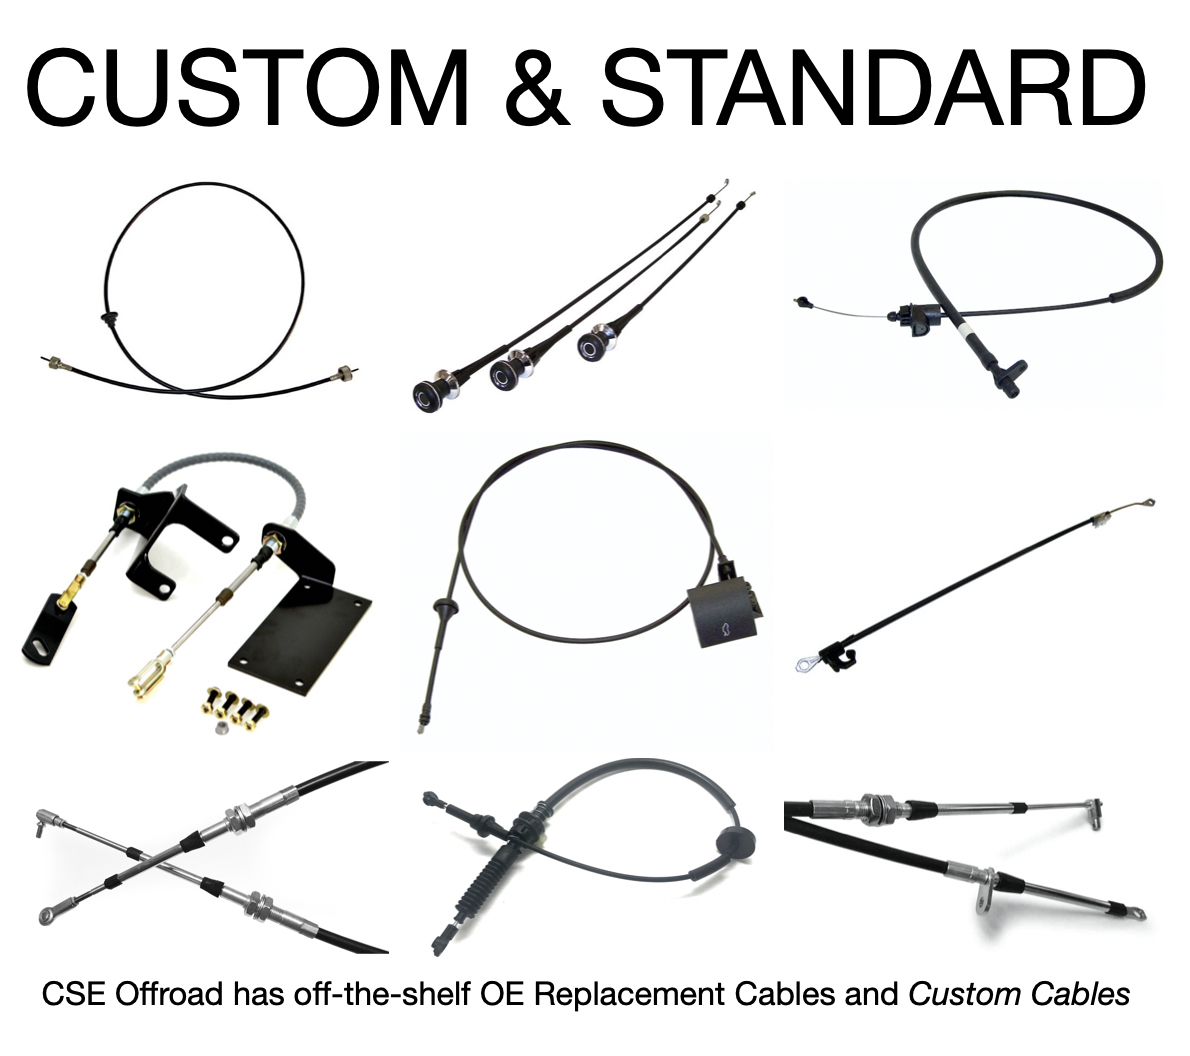 Replacement Cables and Custom Cables